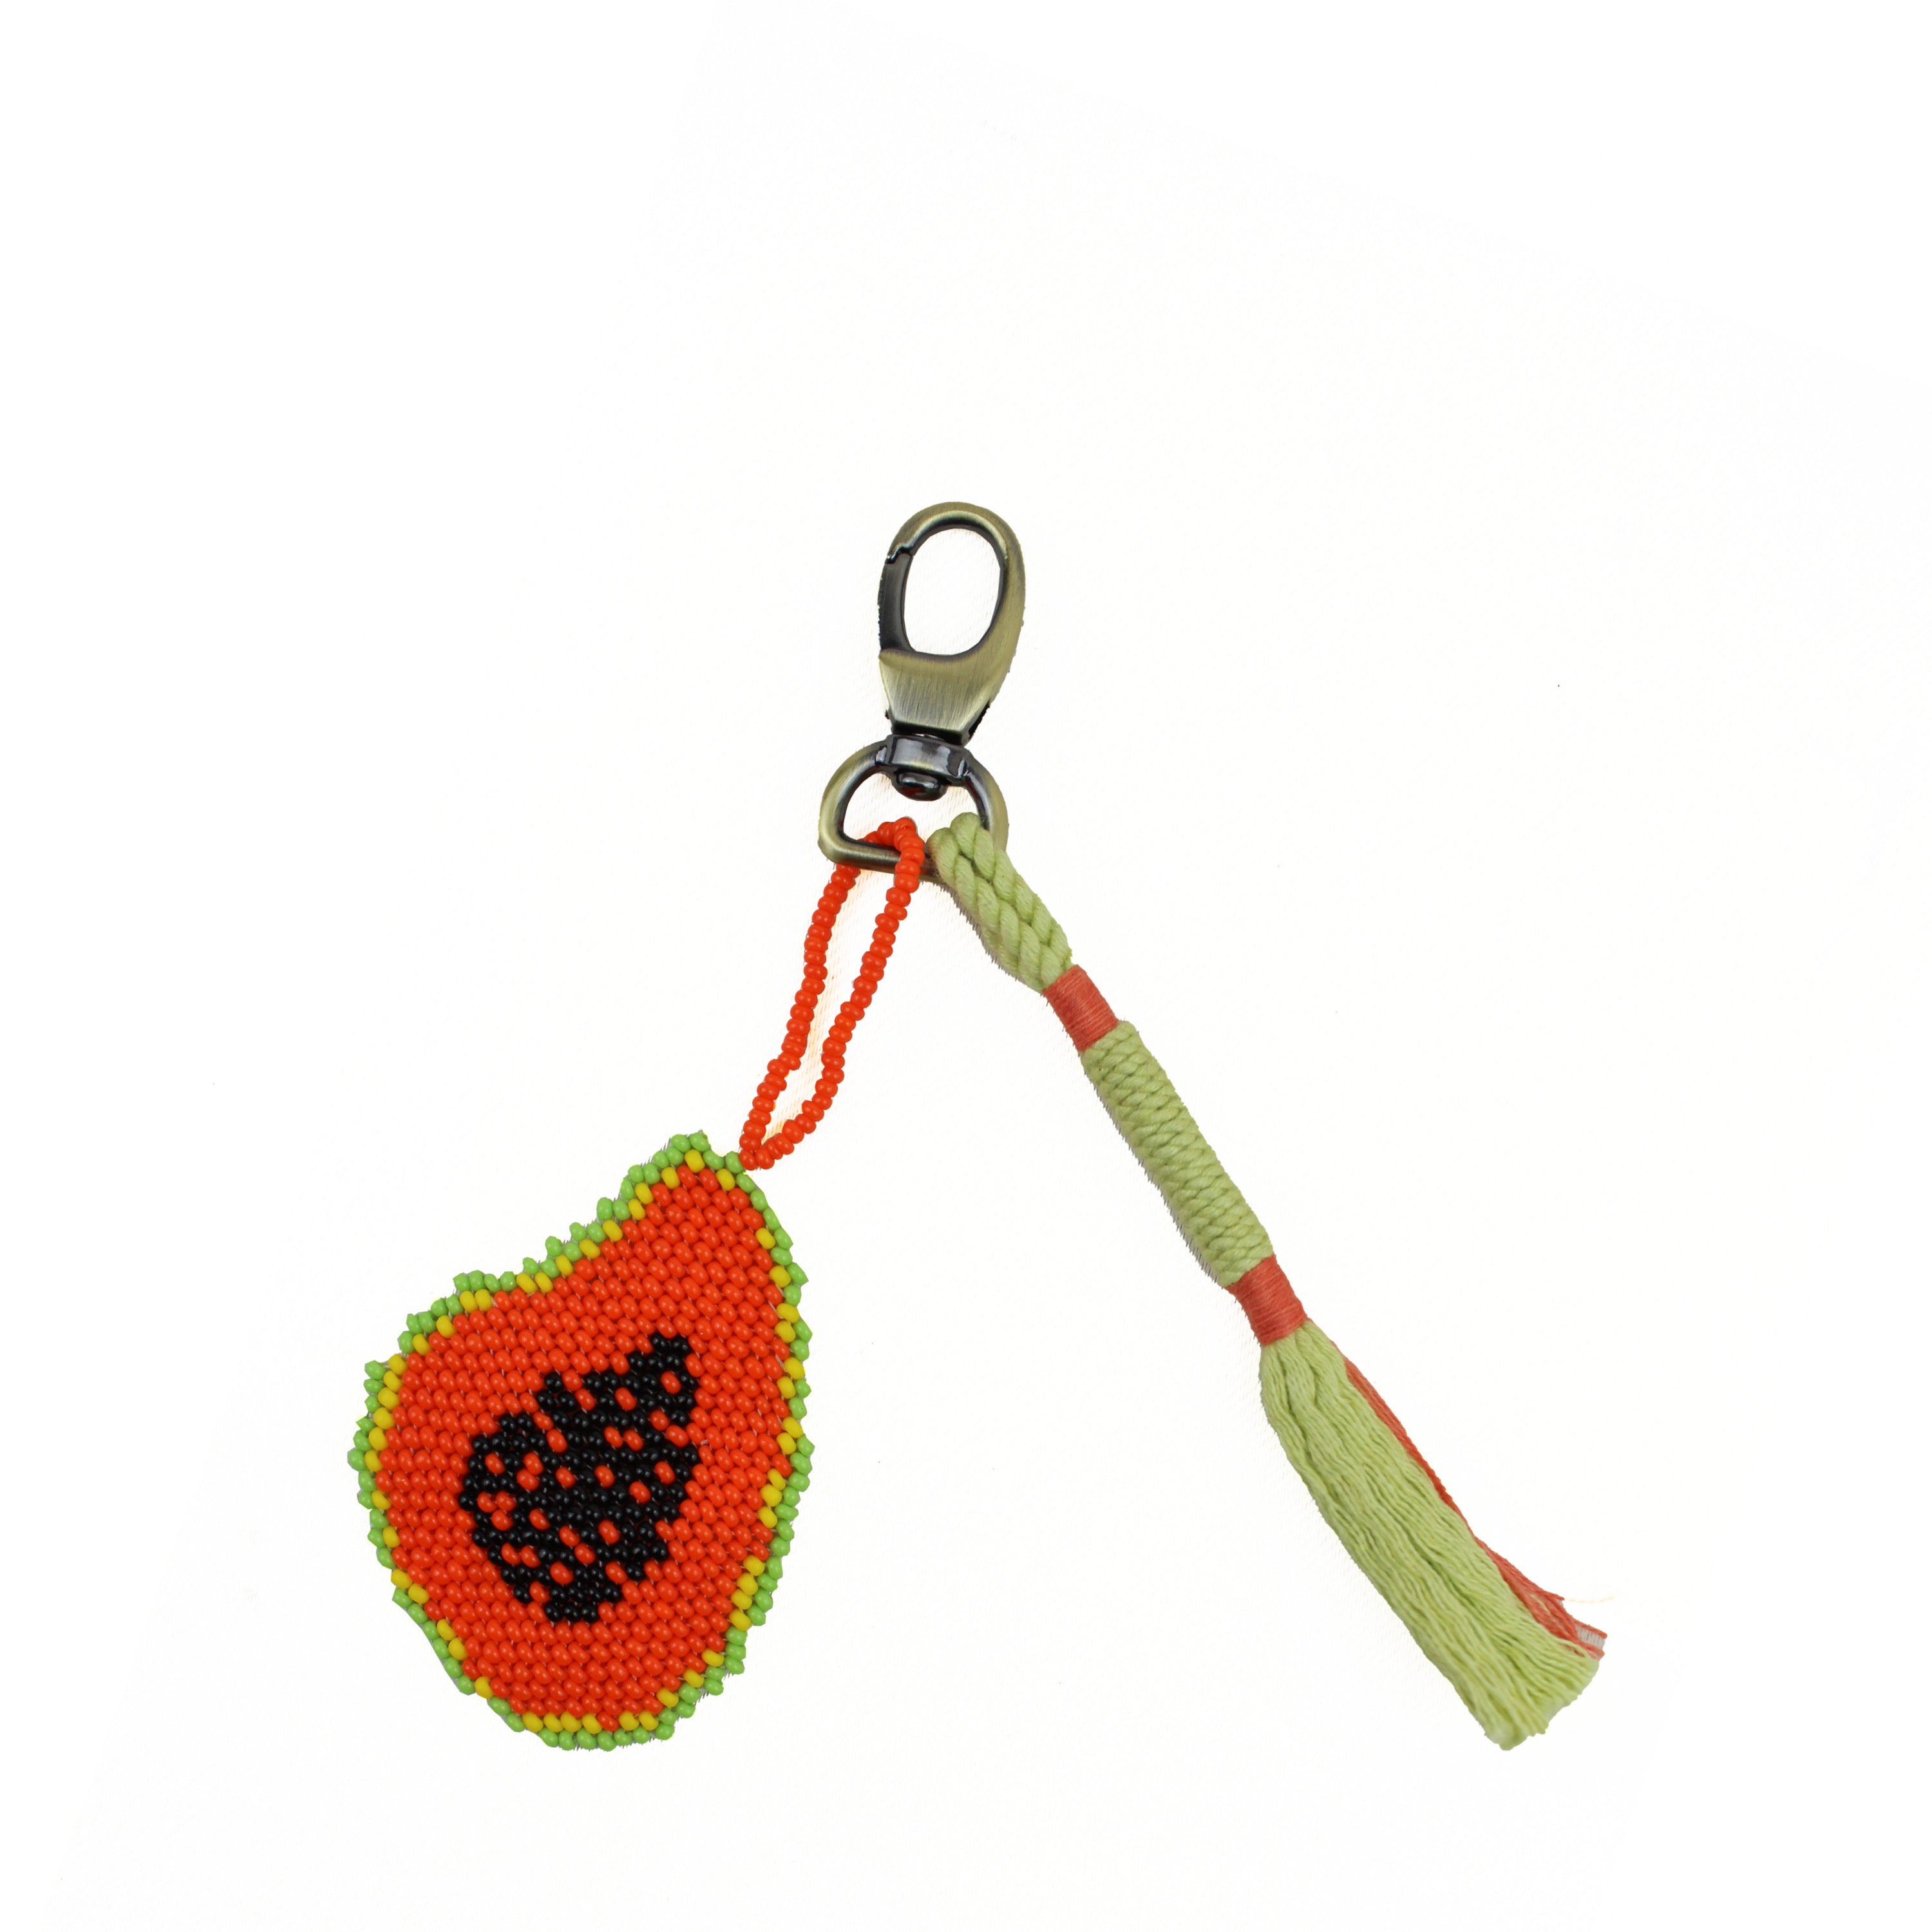 Hand woven artisan Go Bananas Keychain. It has a beaded papaya graphic charm with a woven green and orange tassel attached to a lobster claw clasp.